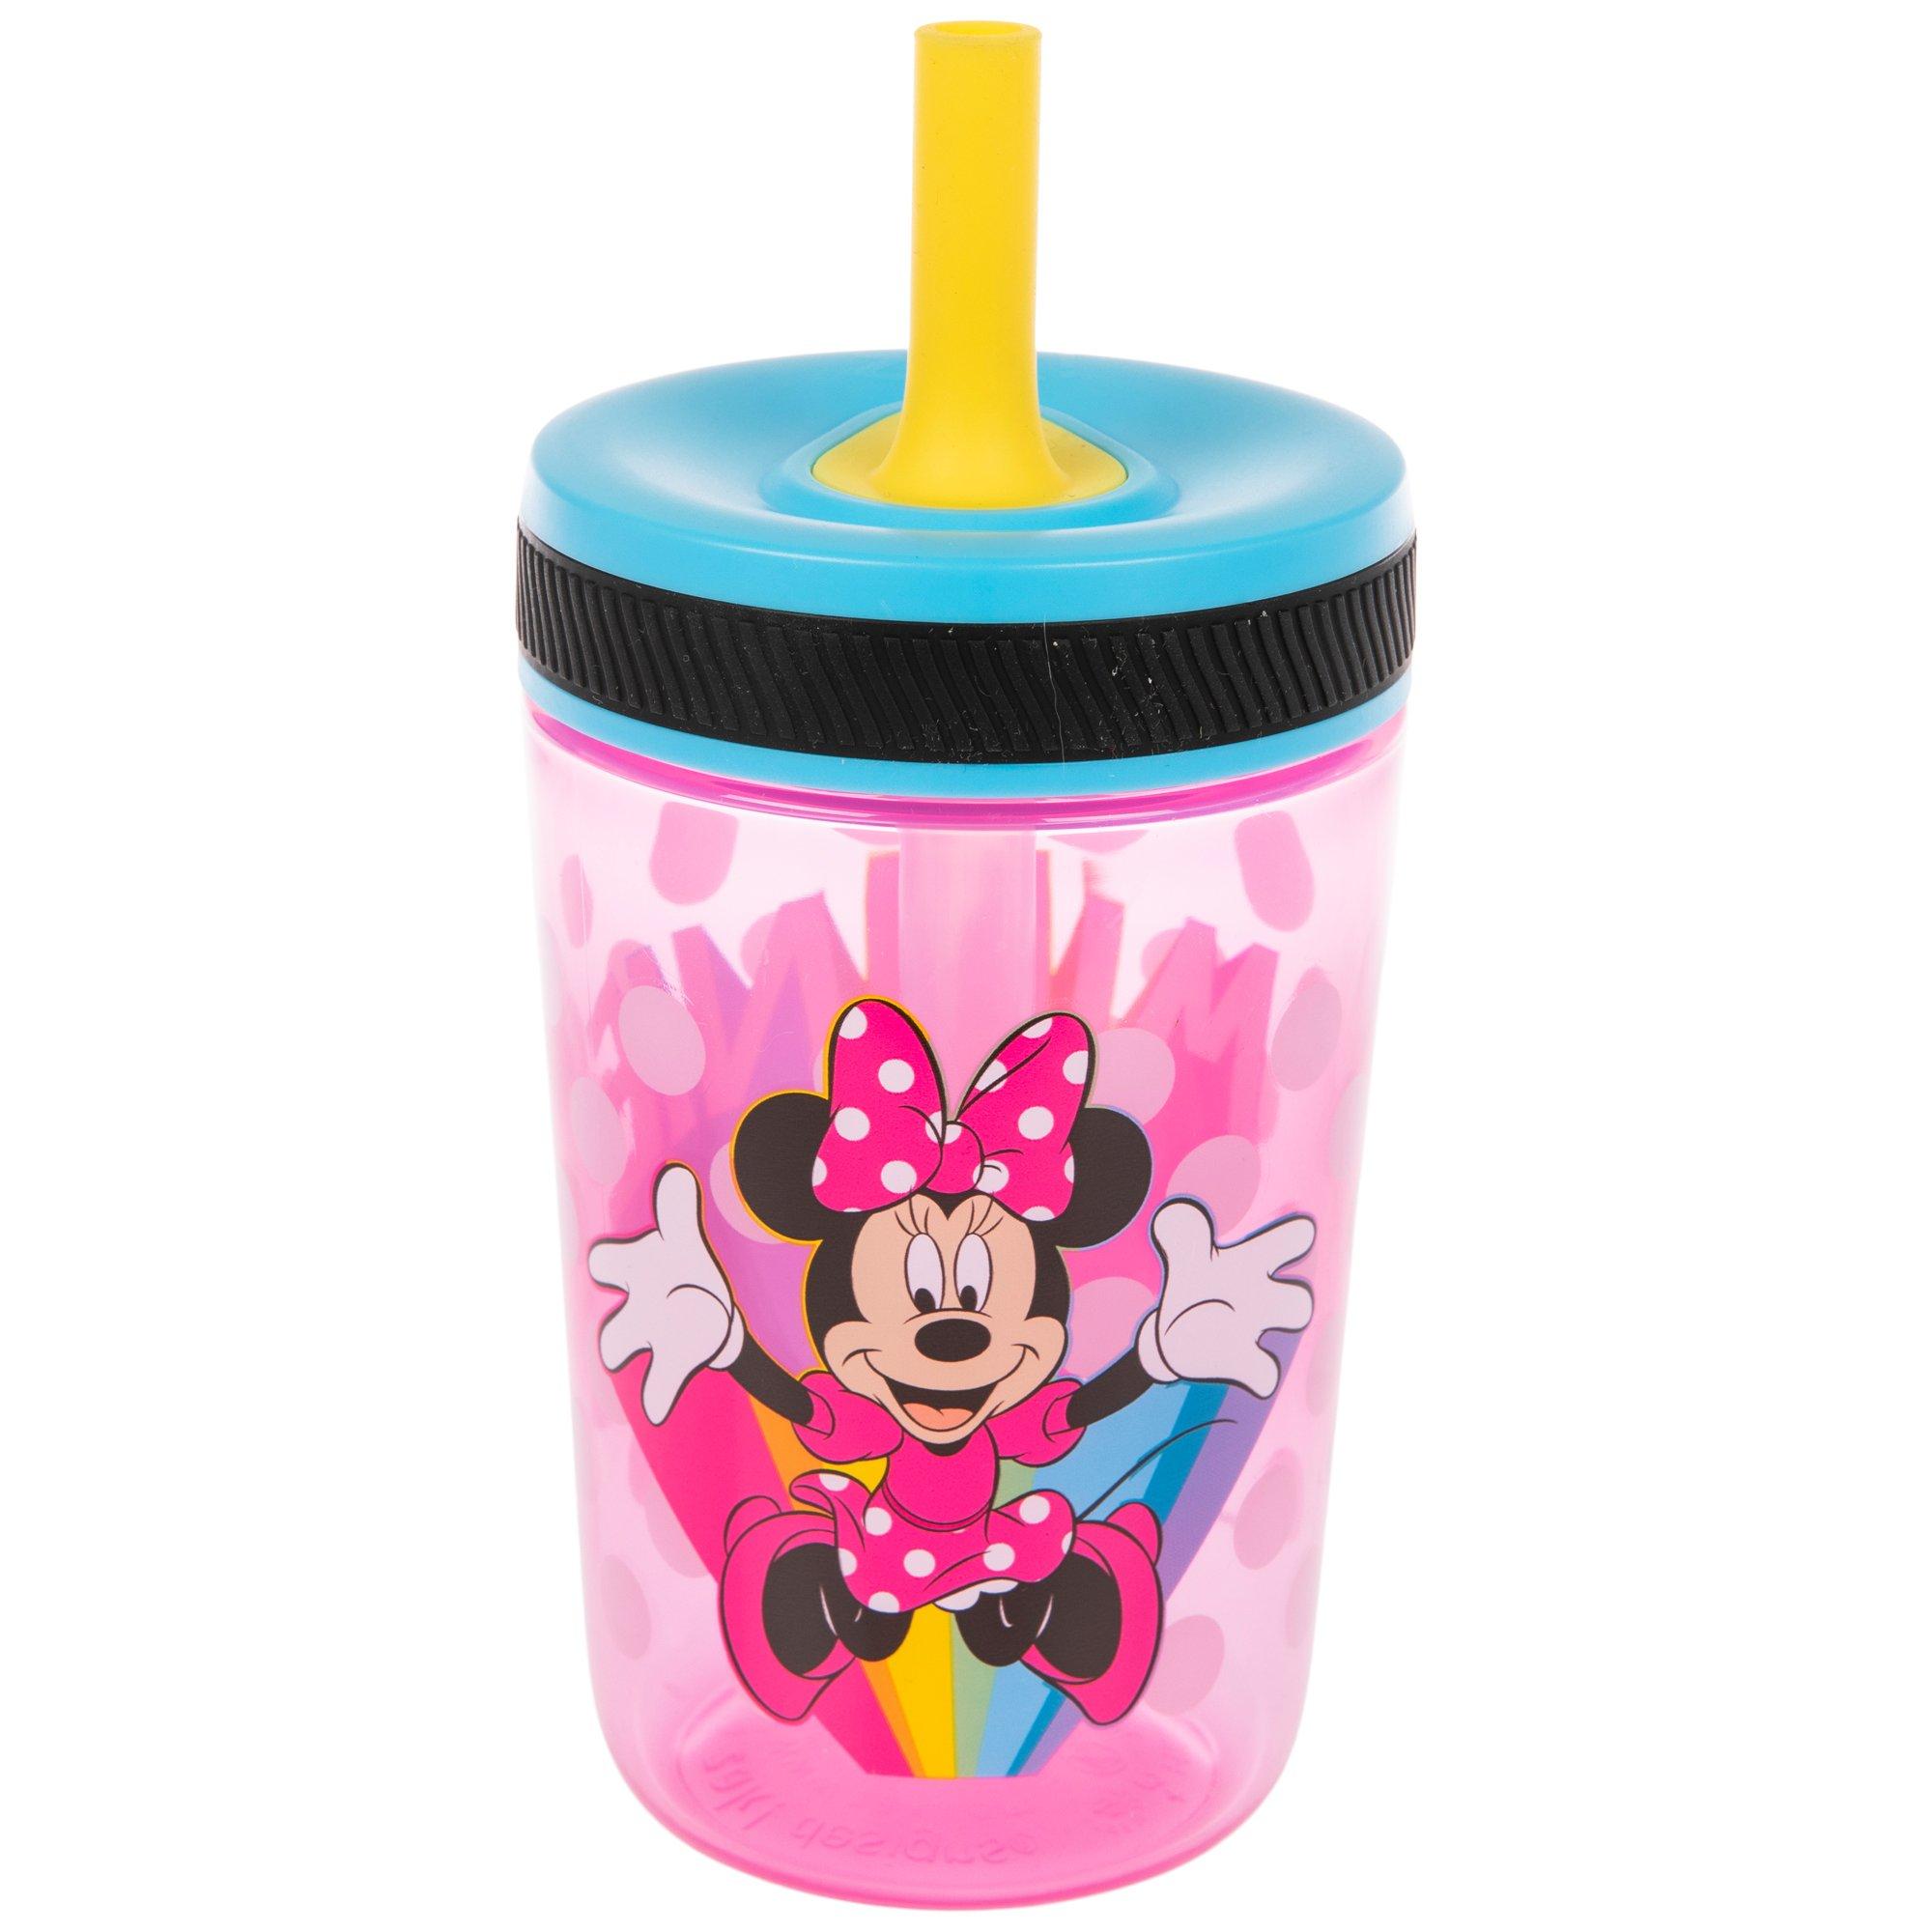 Minnie Mouse Sippy Cup, Hobby Lobby